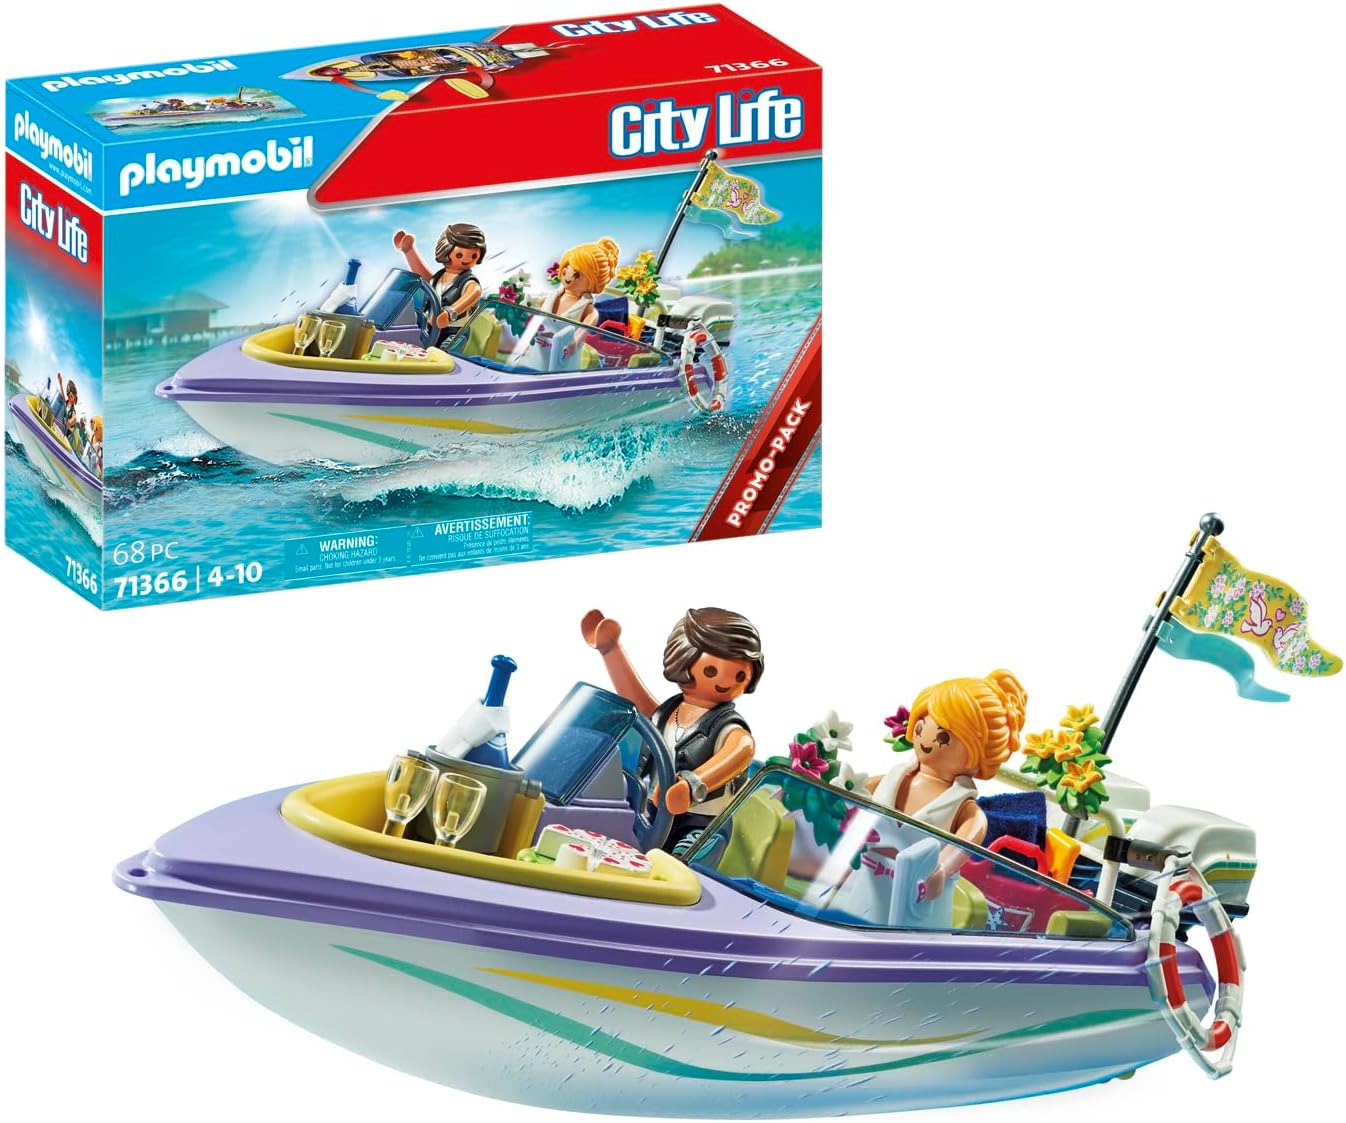 PLAYMOBIL City Life 71366 Promo Pack Honeymoon, Romantic Trip by Motor Boat, Honeymoon Together After the Dream Wedding, Toy for Children from 4 Years